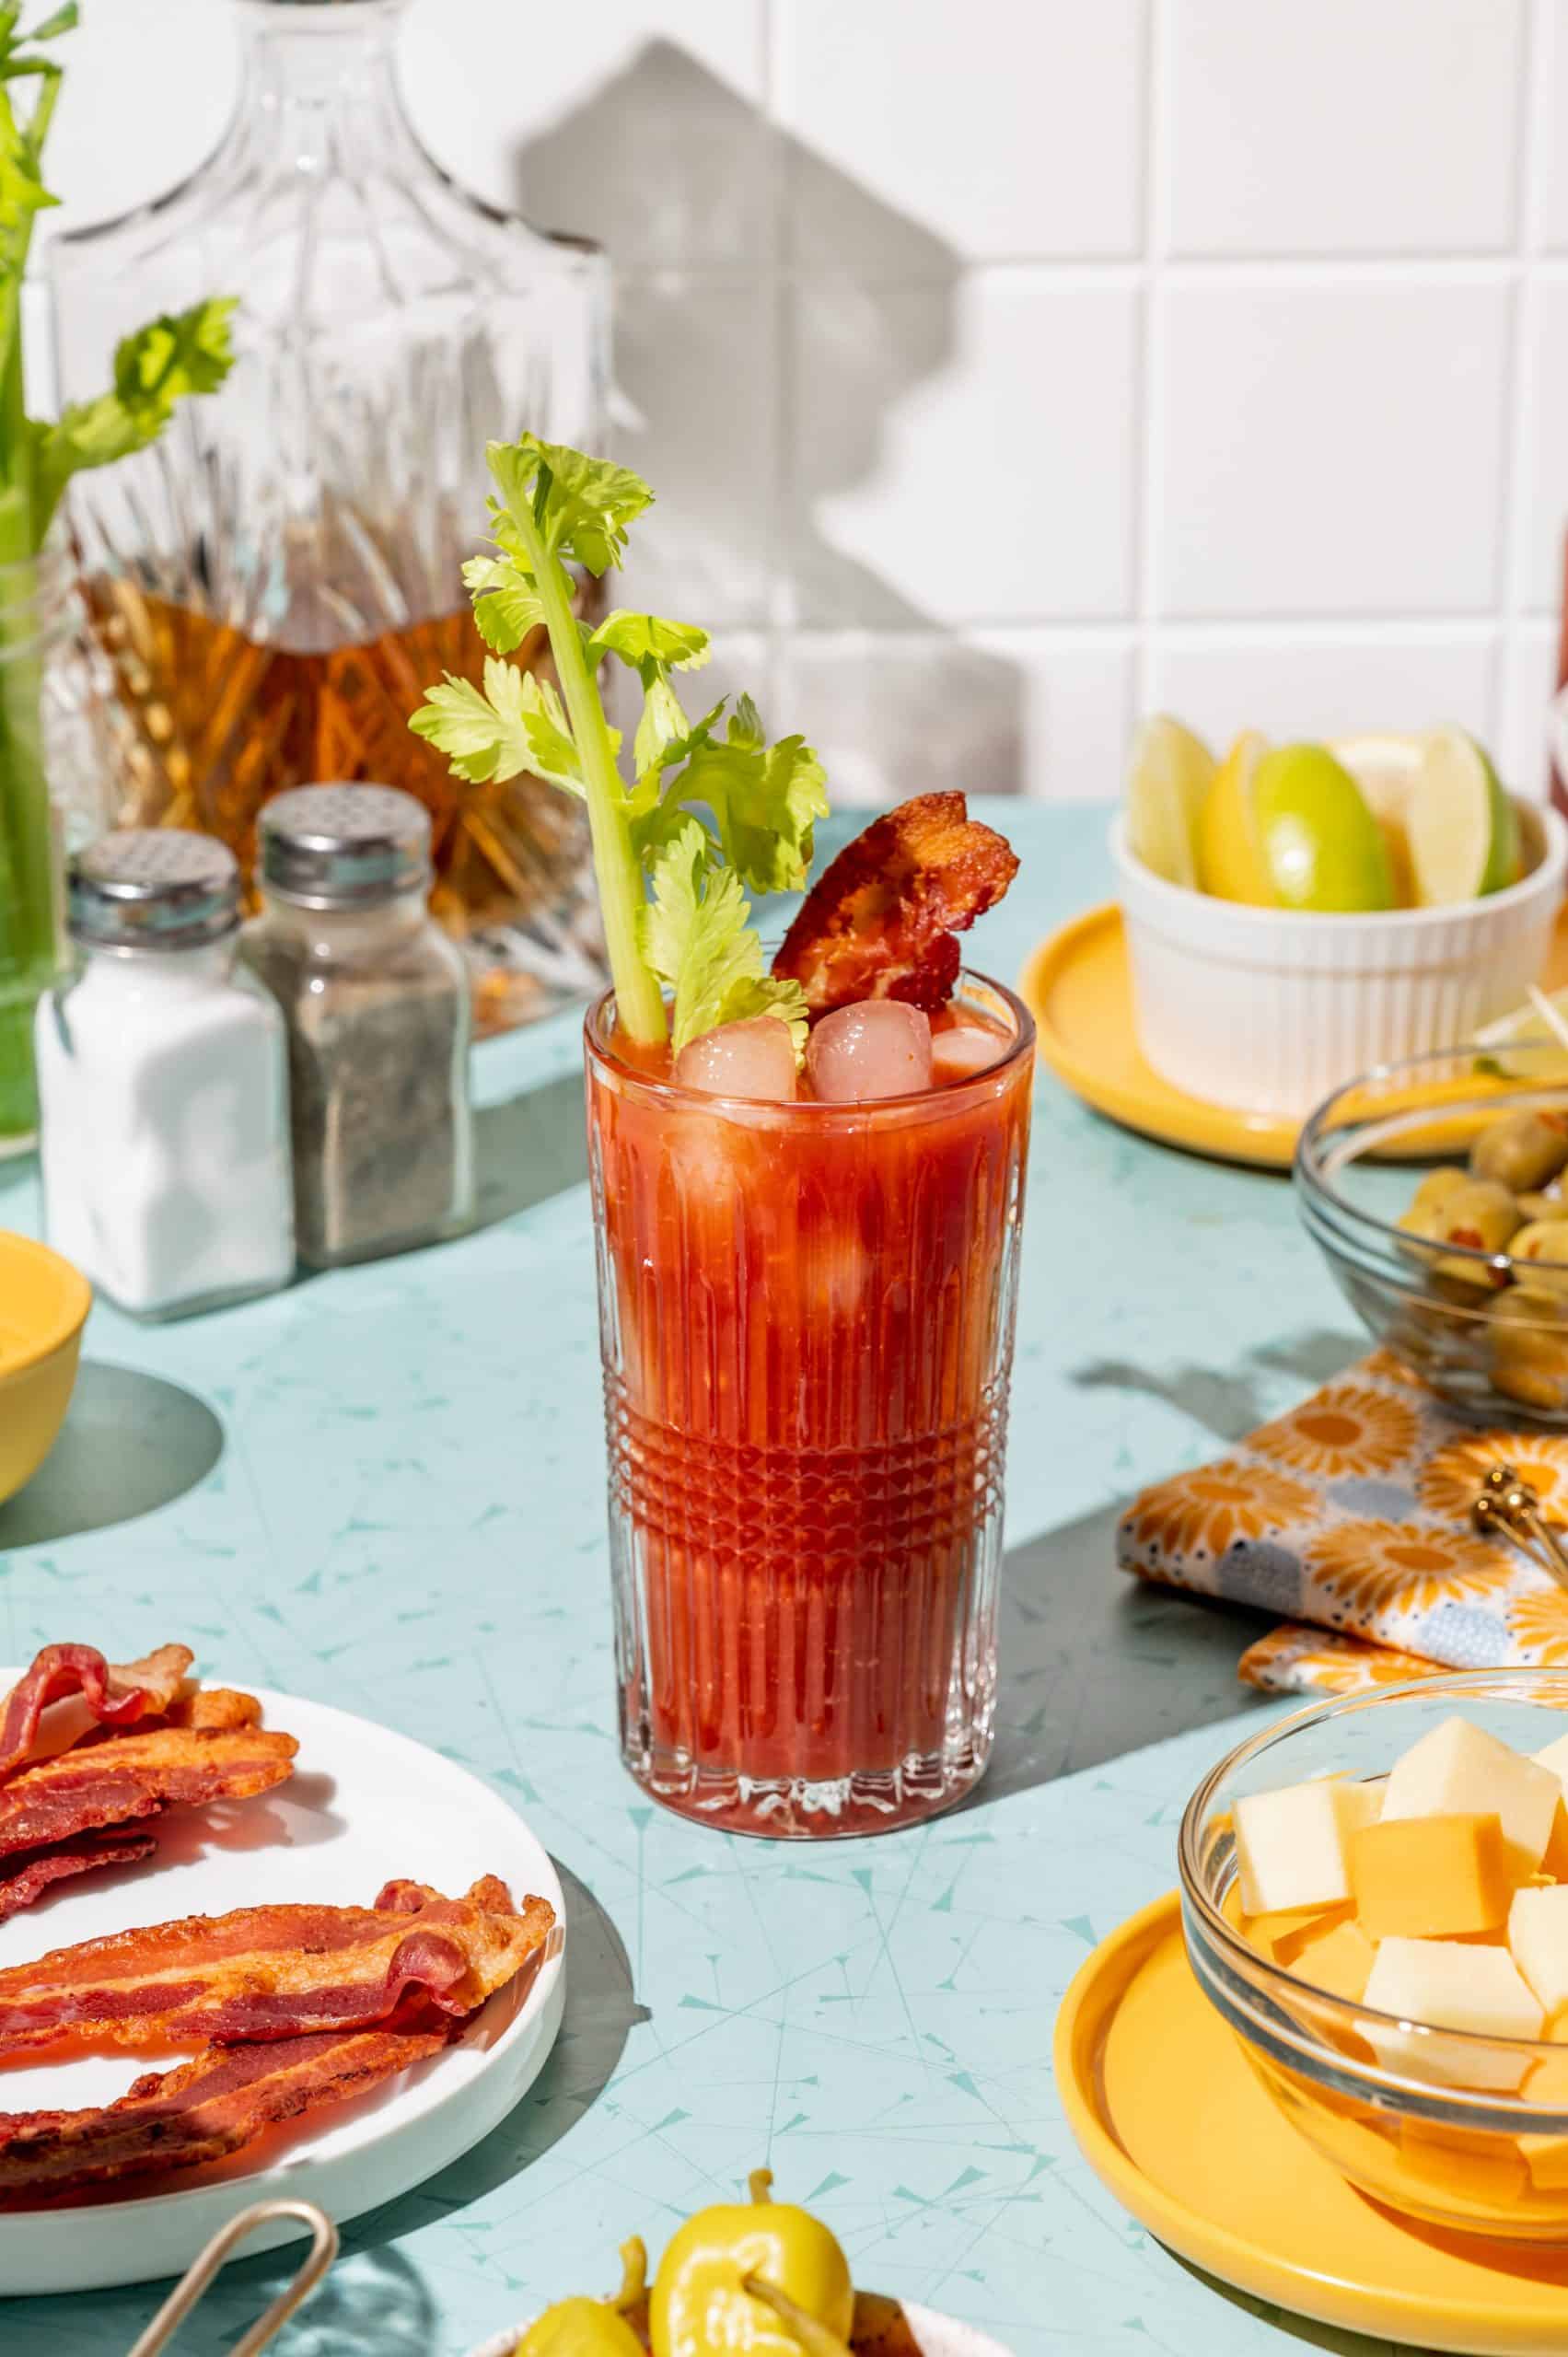 A bloody mary cocktail in a glass with a strip of bacon and a celery stalk.